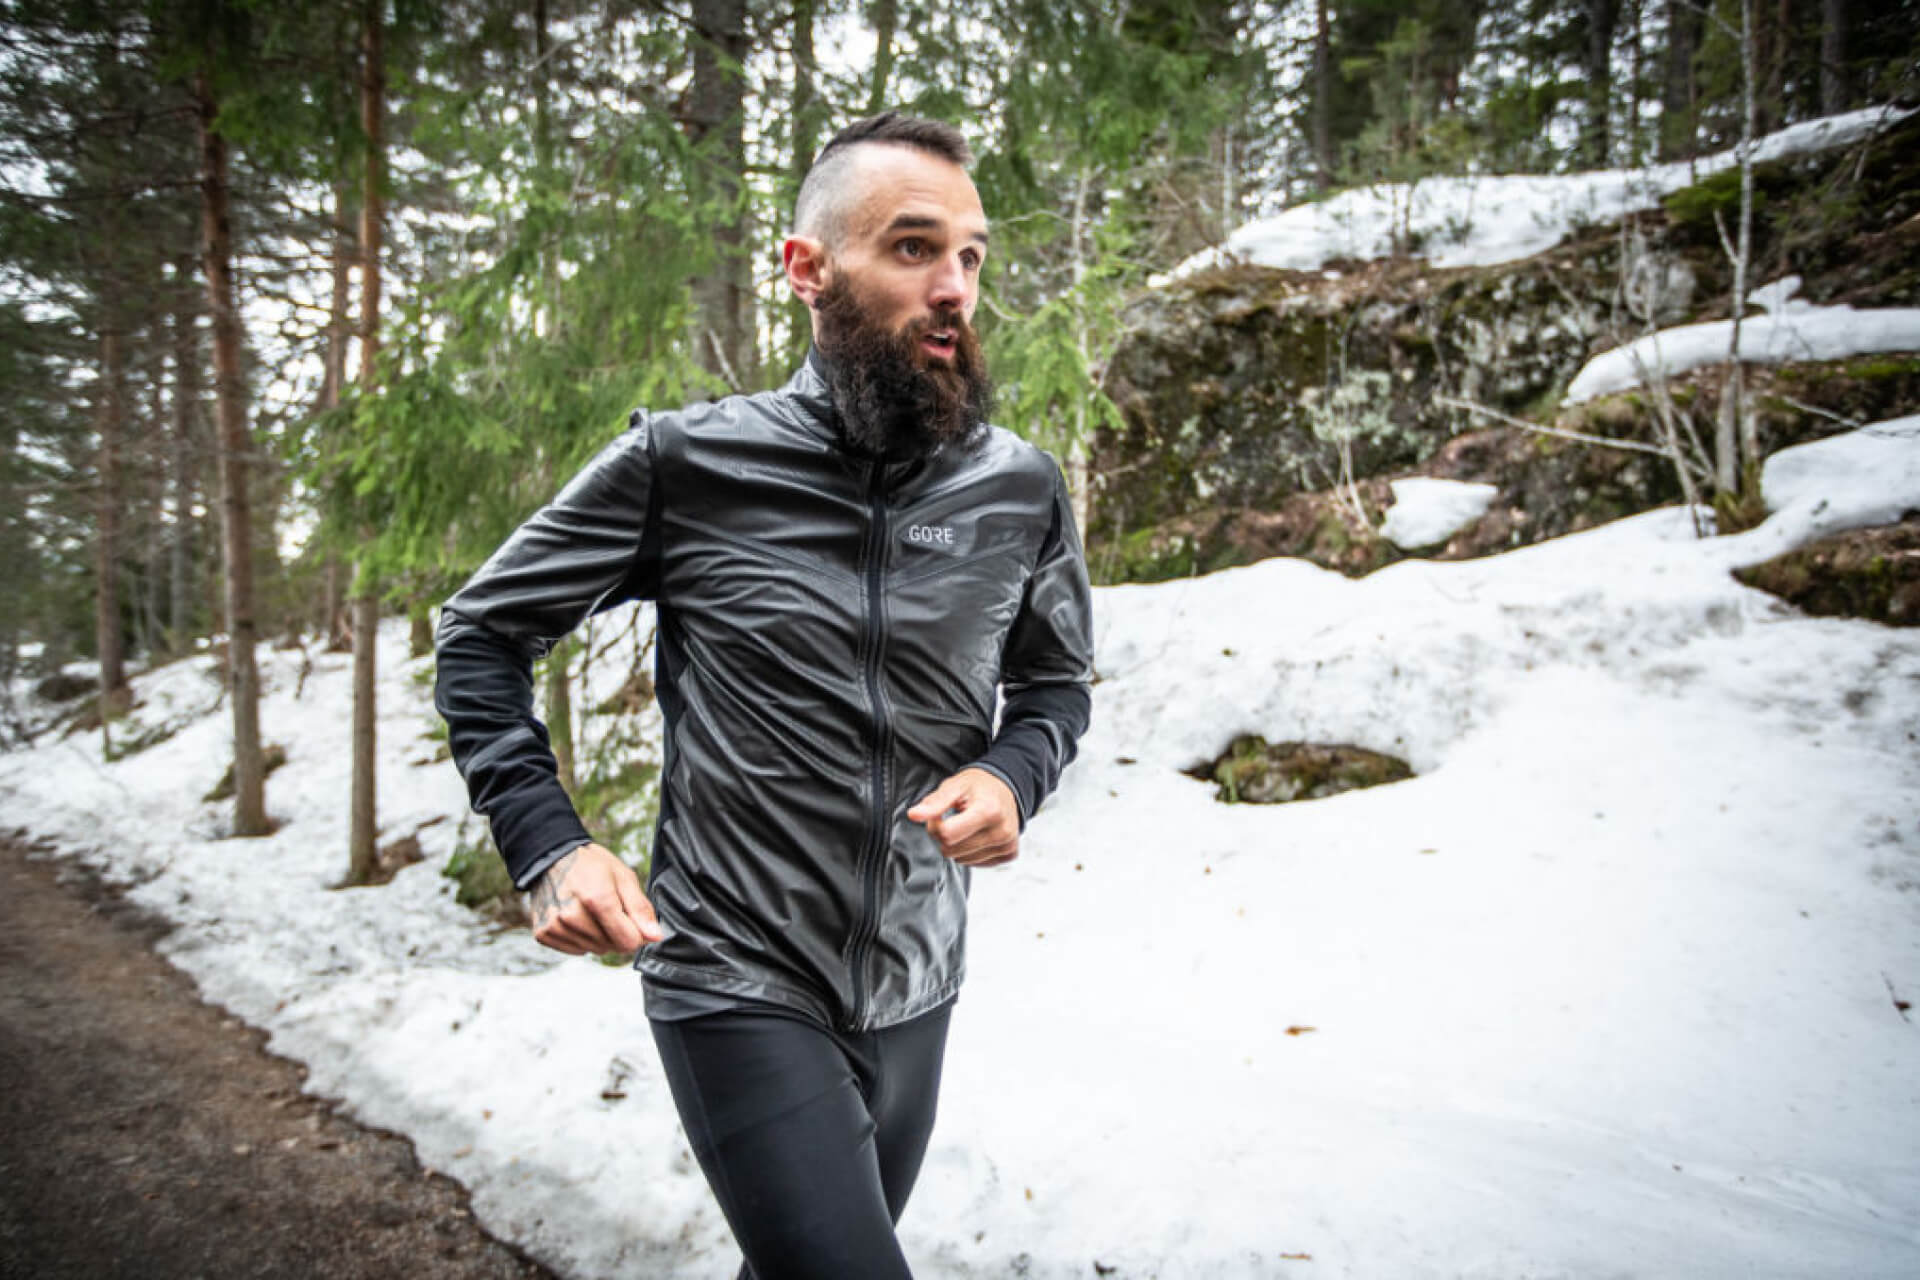 Haibike Hero Yoann Stuck jogging in the snowy forest